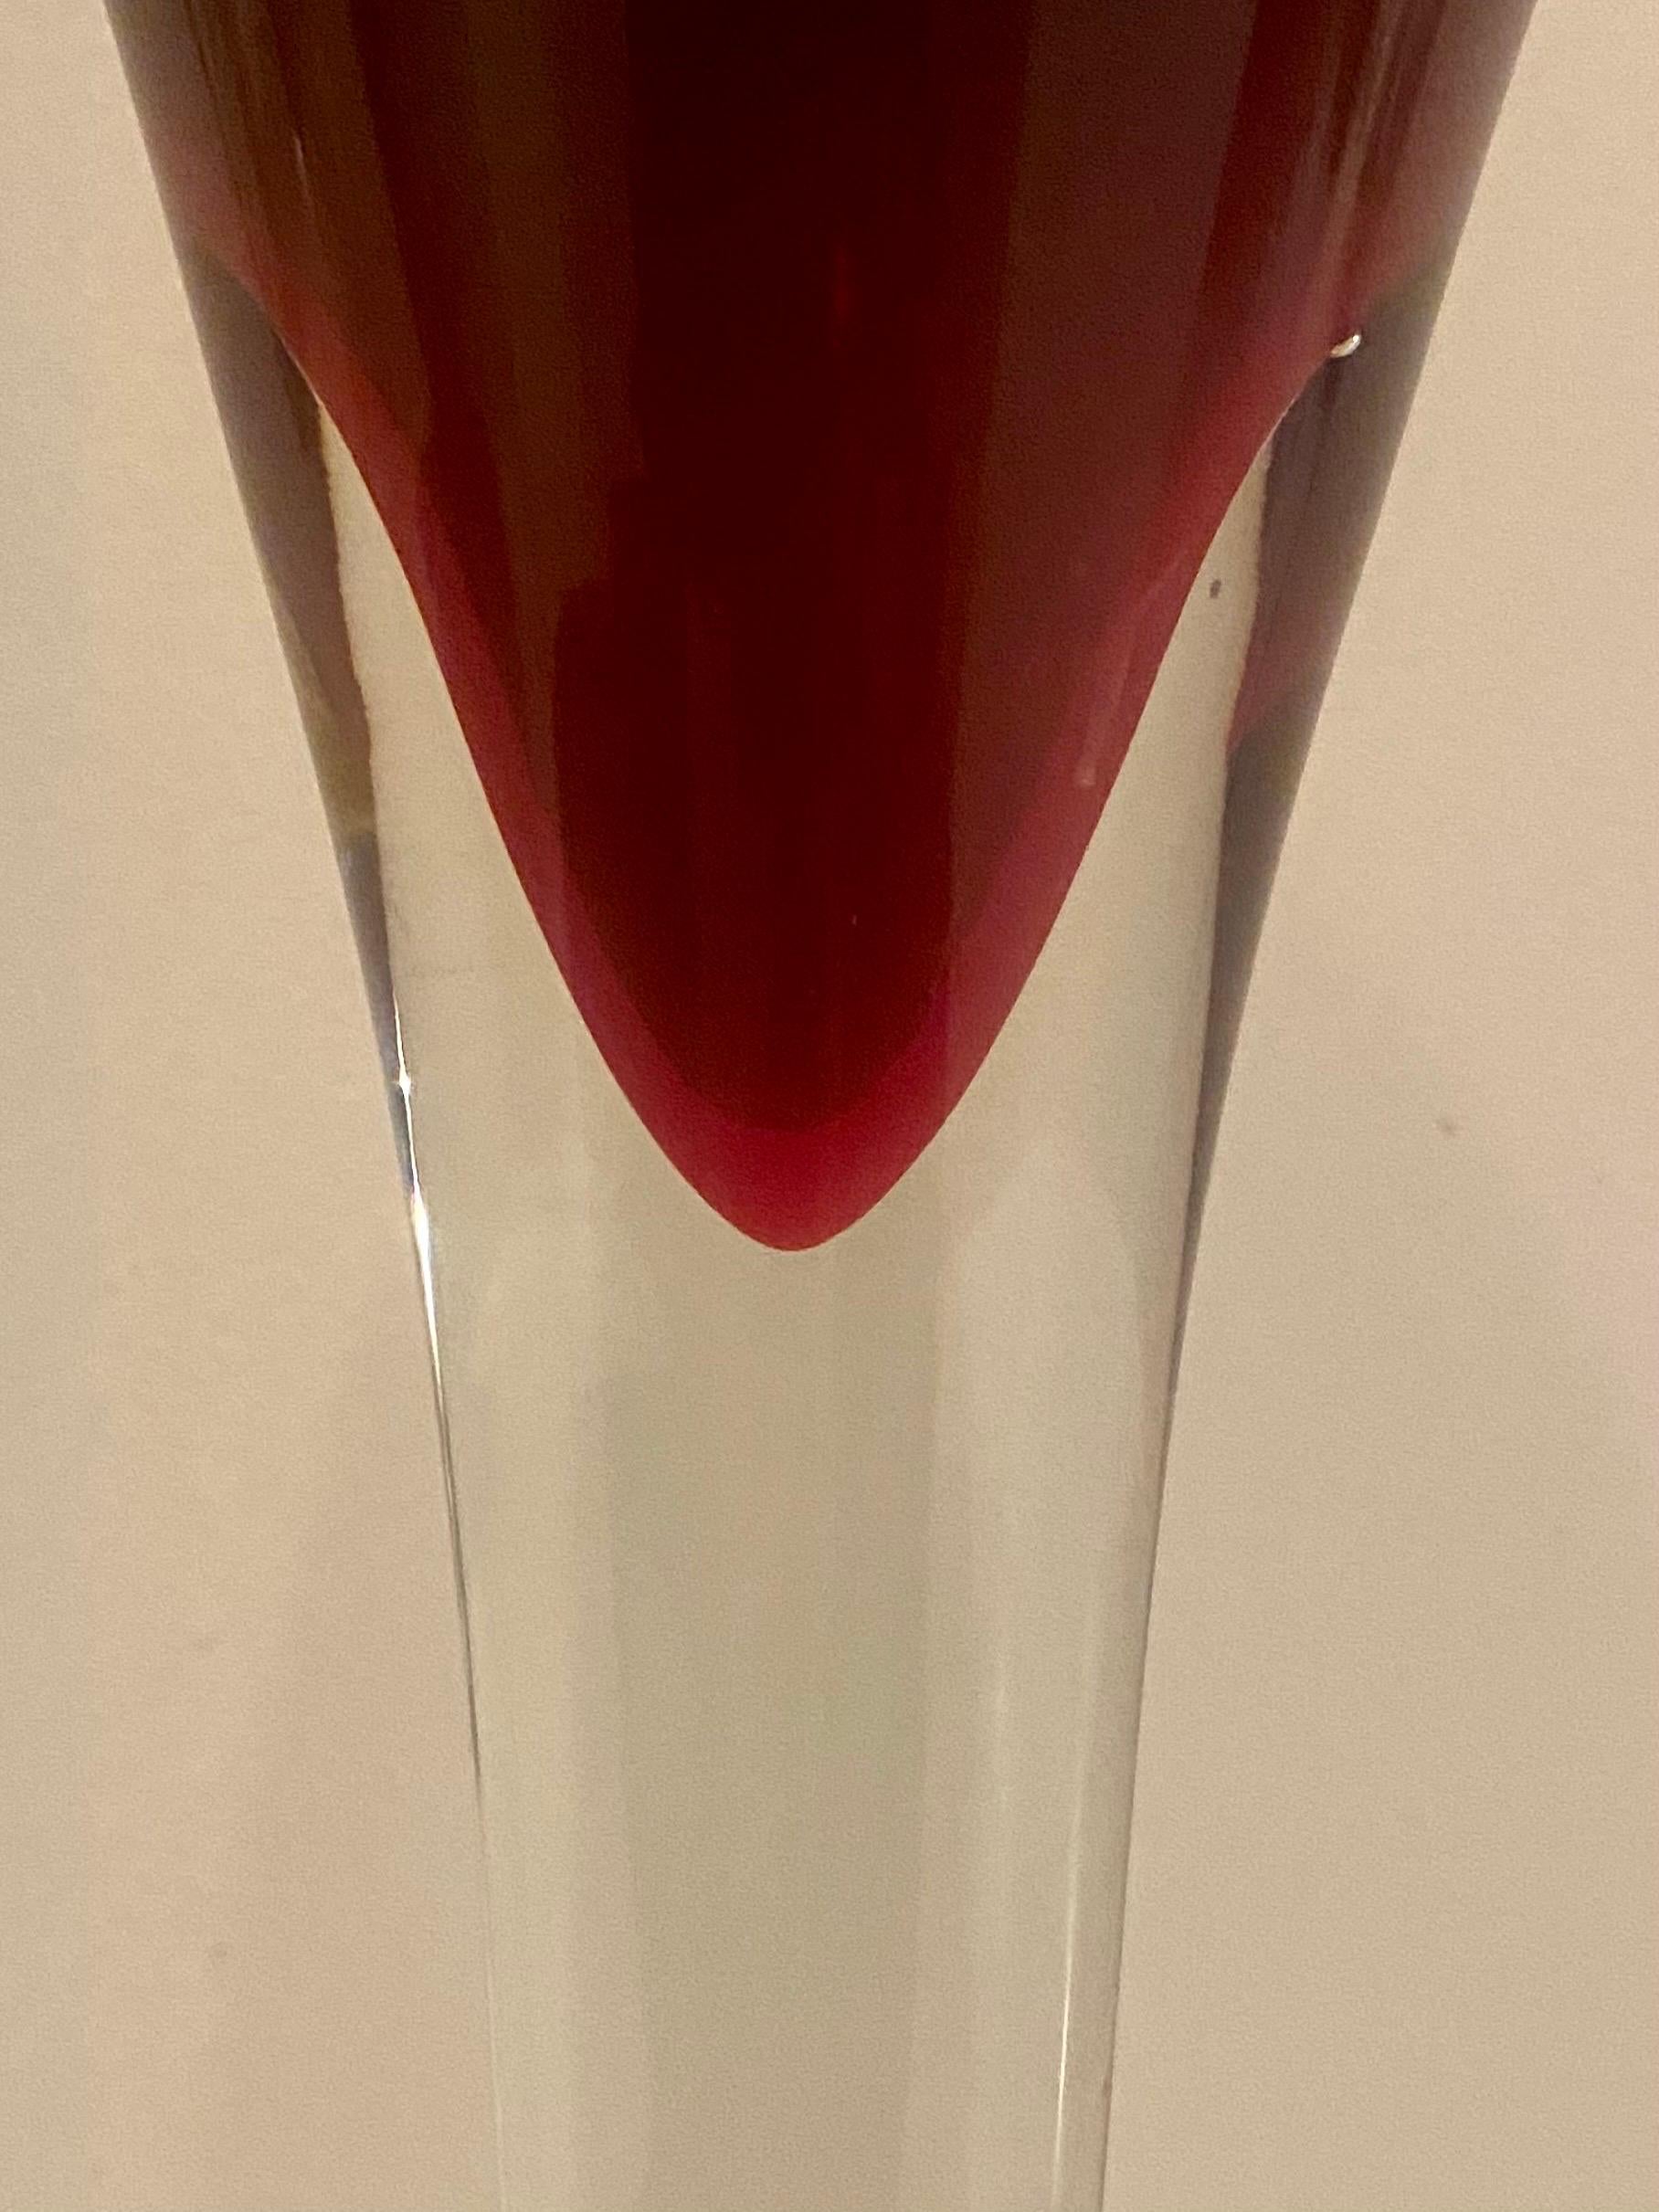 Mid-Century Modern Tall Murano Glass Coupe Vase For Sale 11